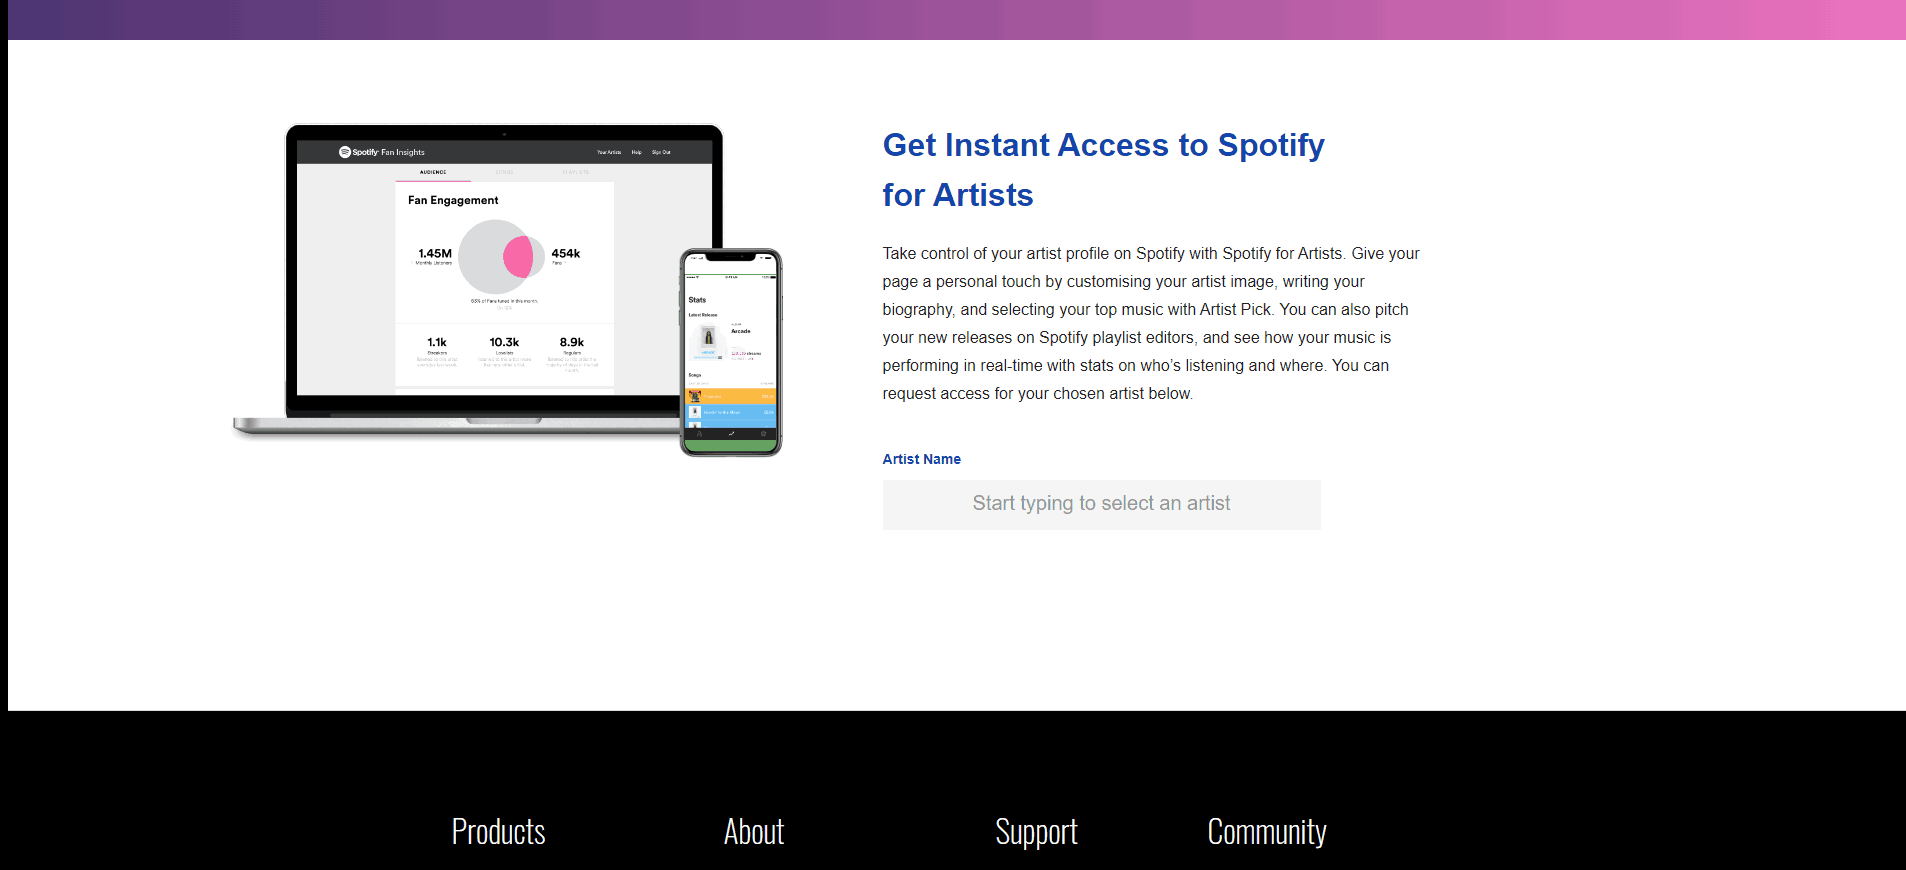 A GIF showing how to verify an artists for Spotify for Artists